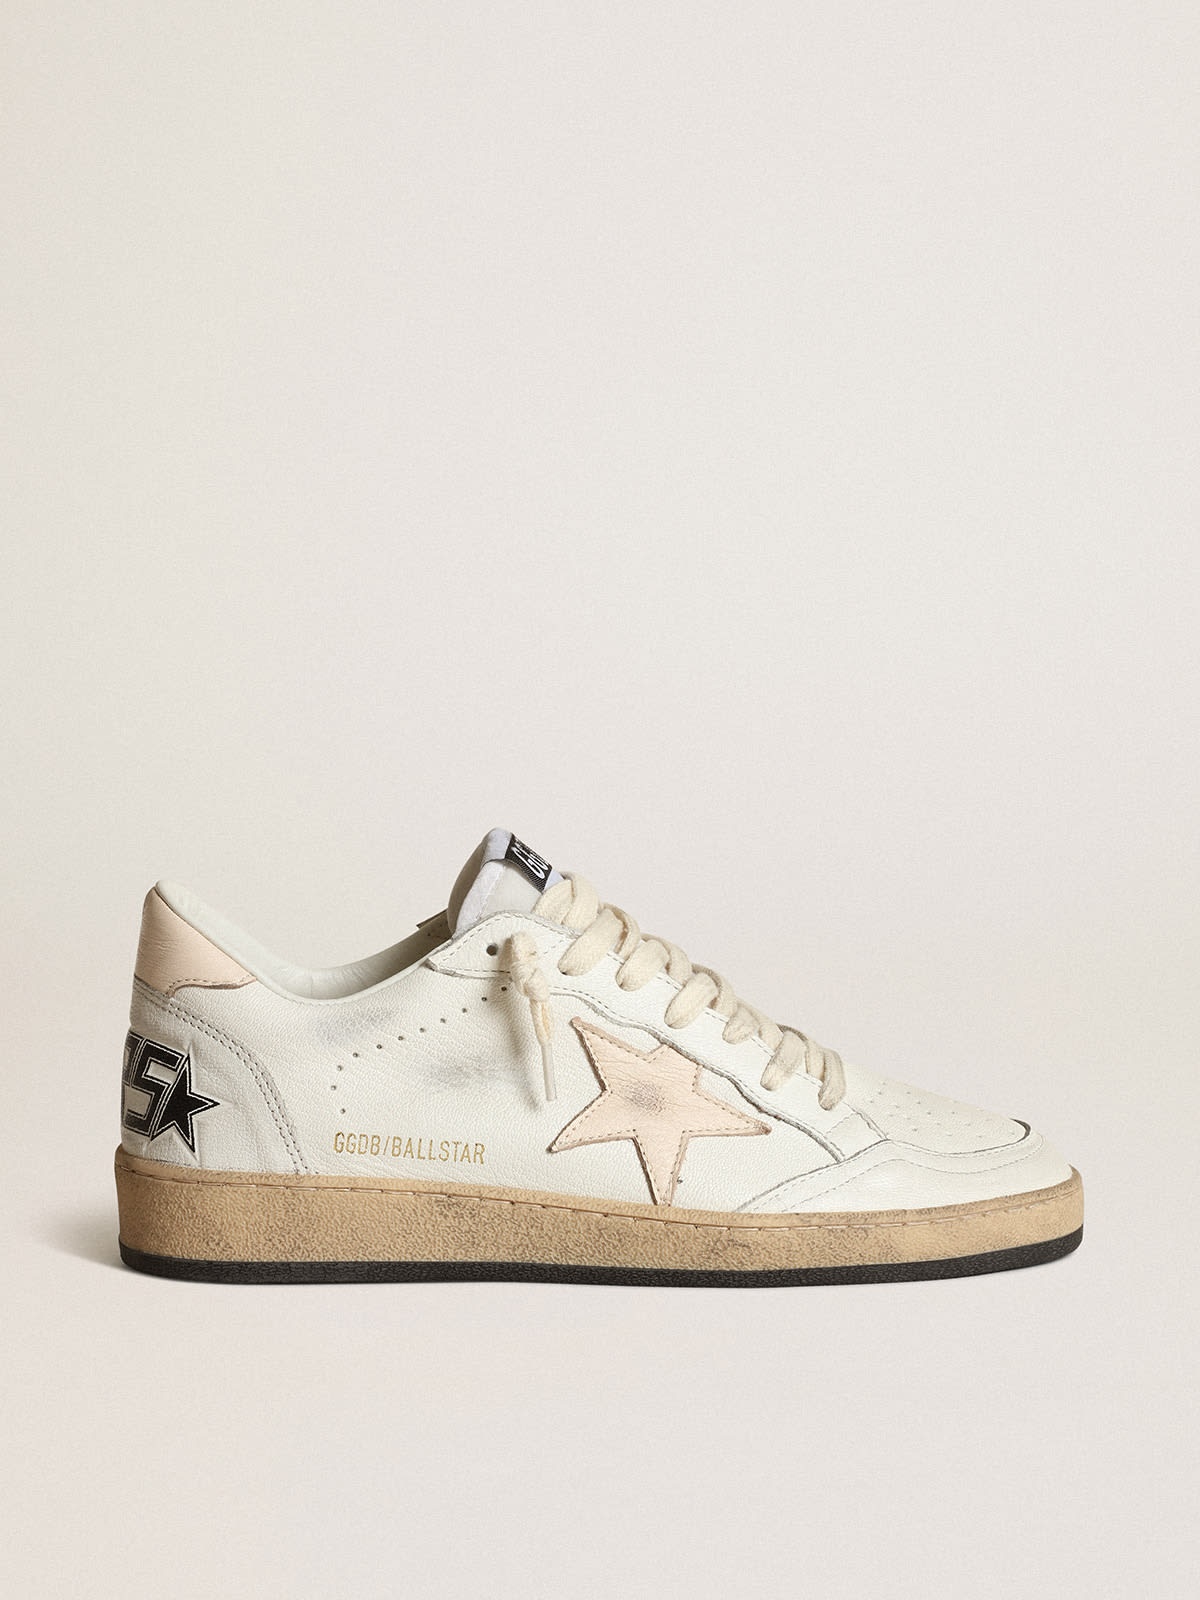 Ball Star LTD in white nappa with a salmon-pink nappa star - 1